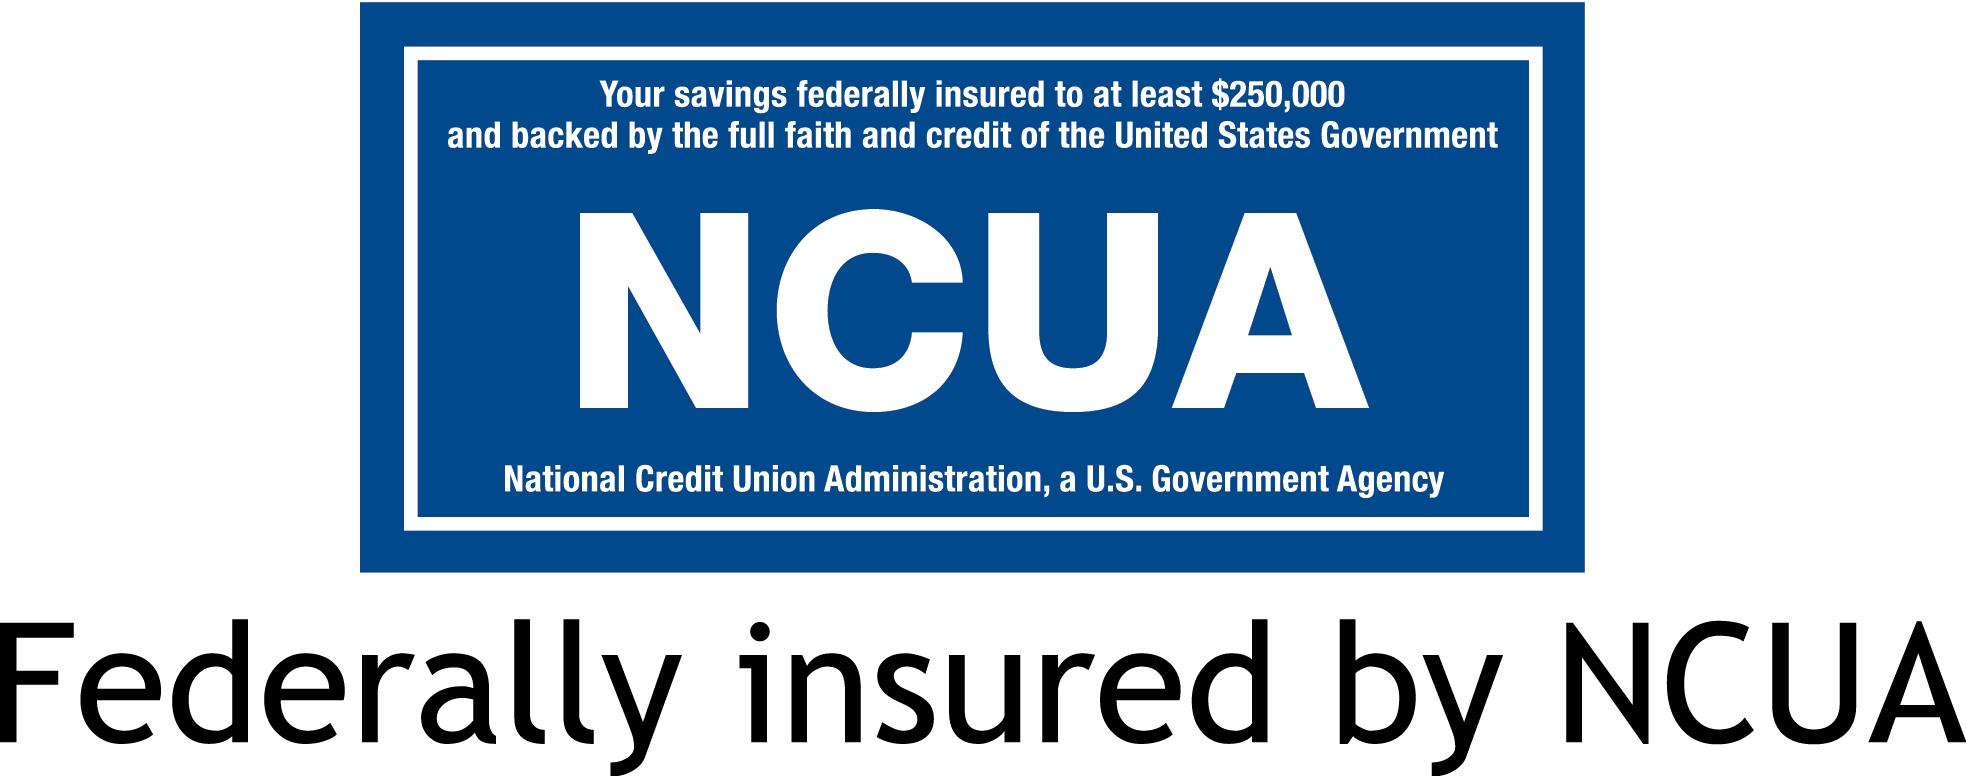 Federally Insured by the National Credit Union Association